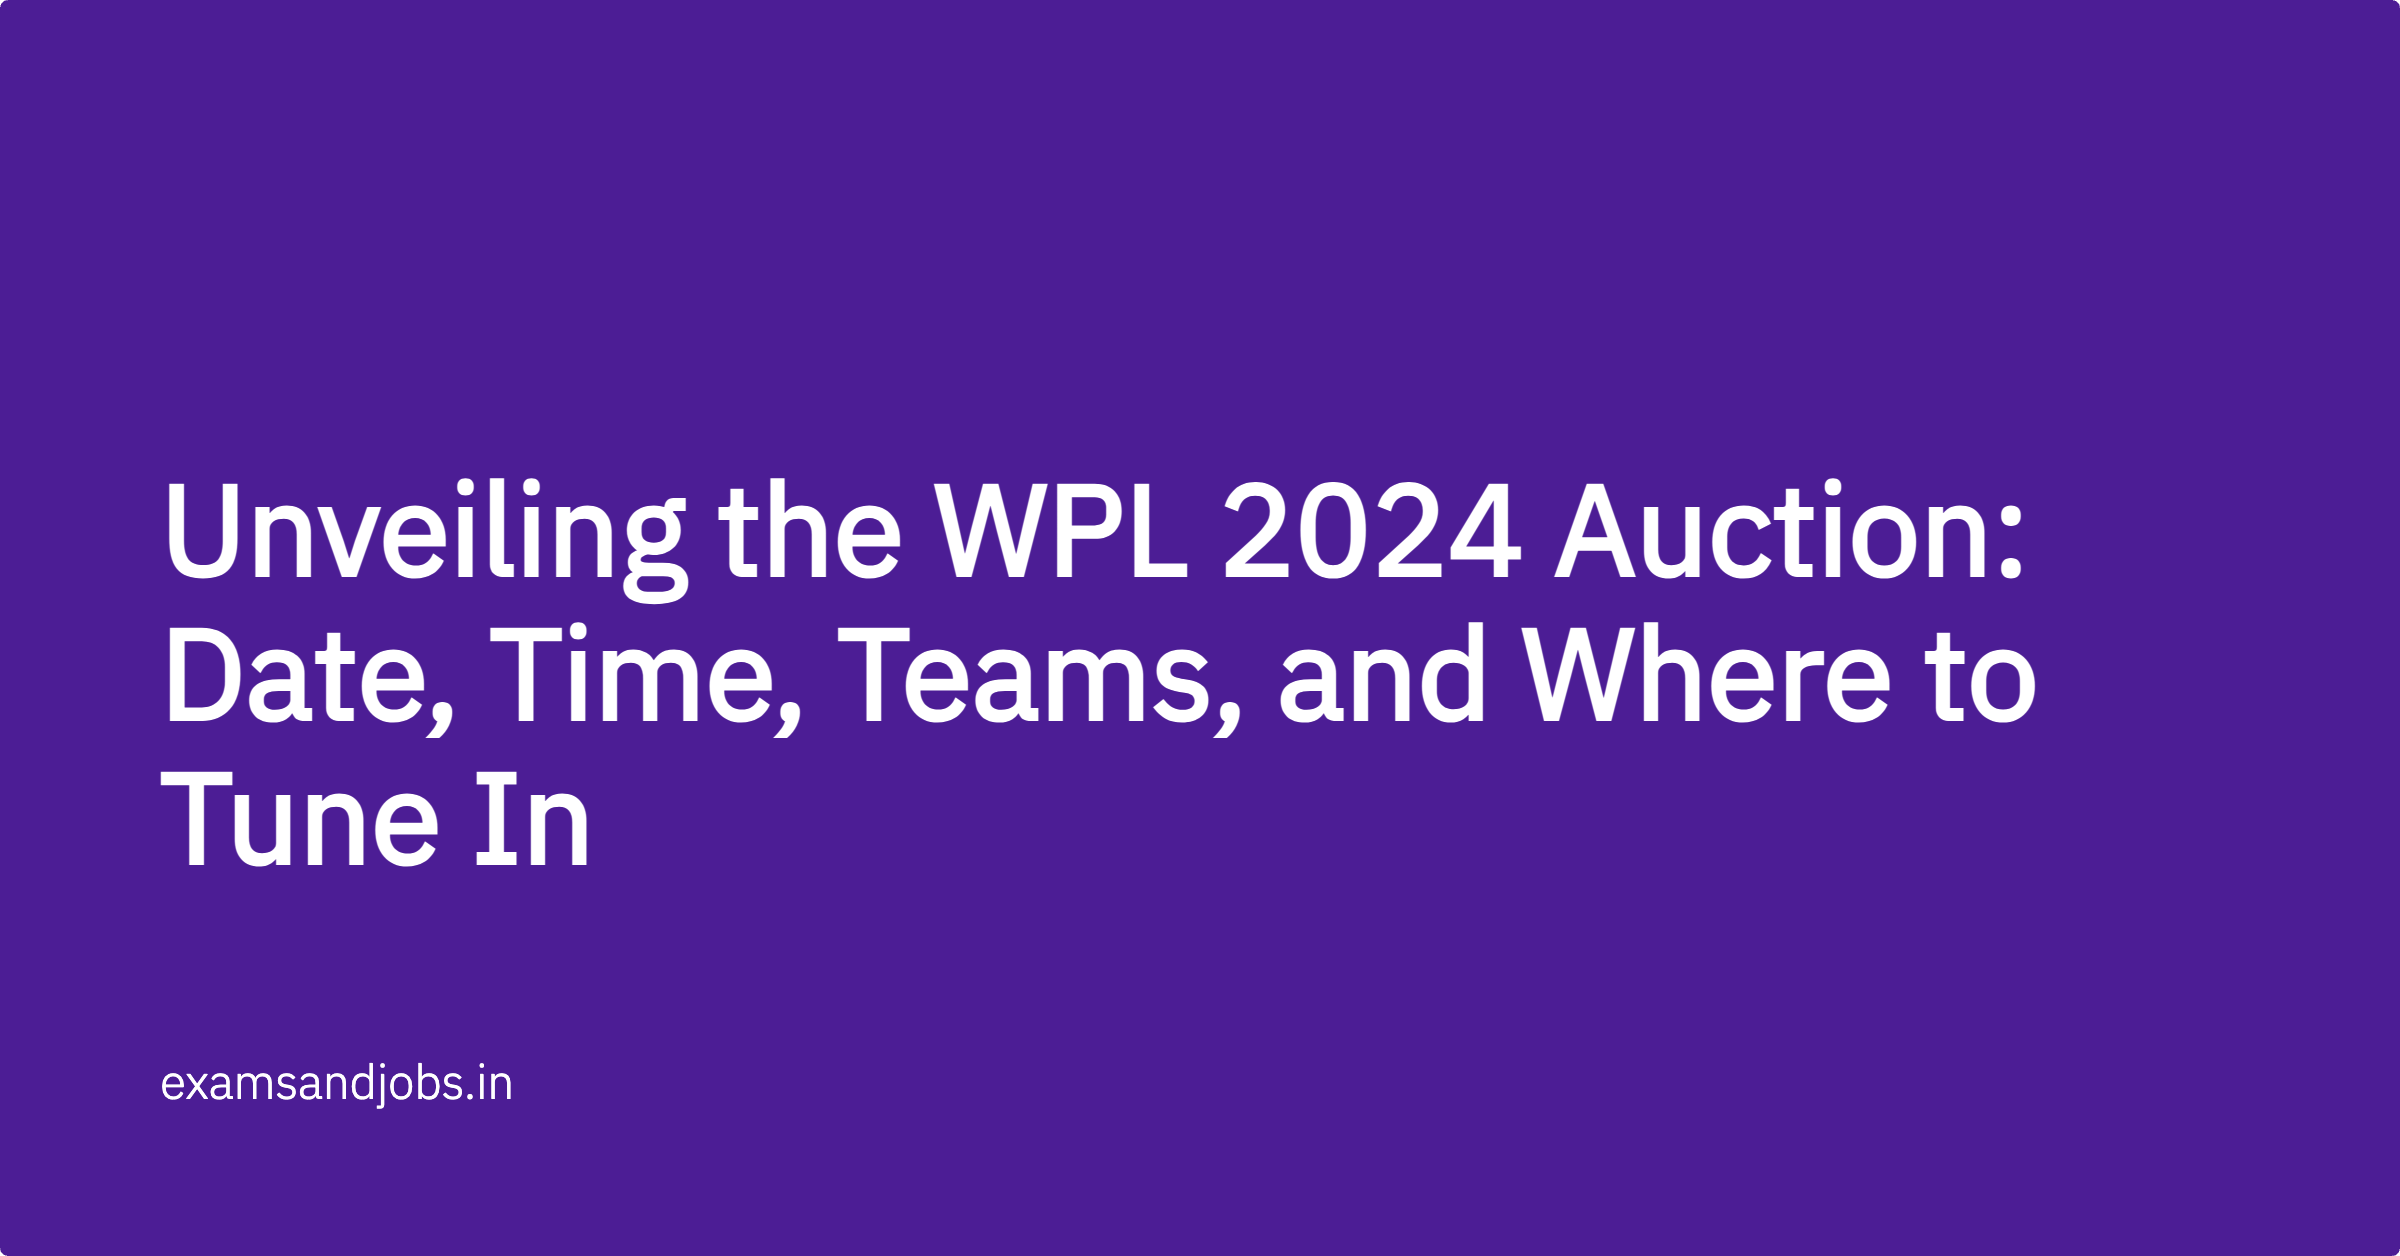 Unveiling the WPL 2024 Auction Date, Time, Teams, and Where to Tune In